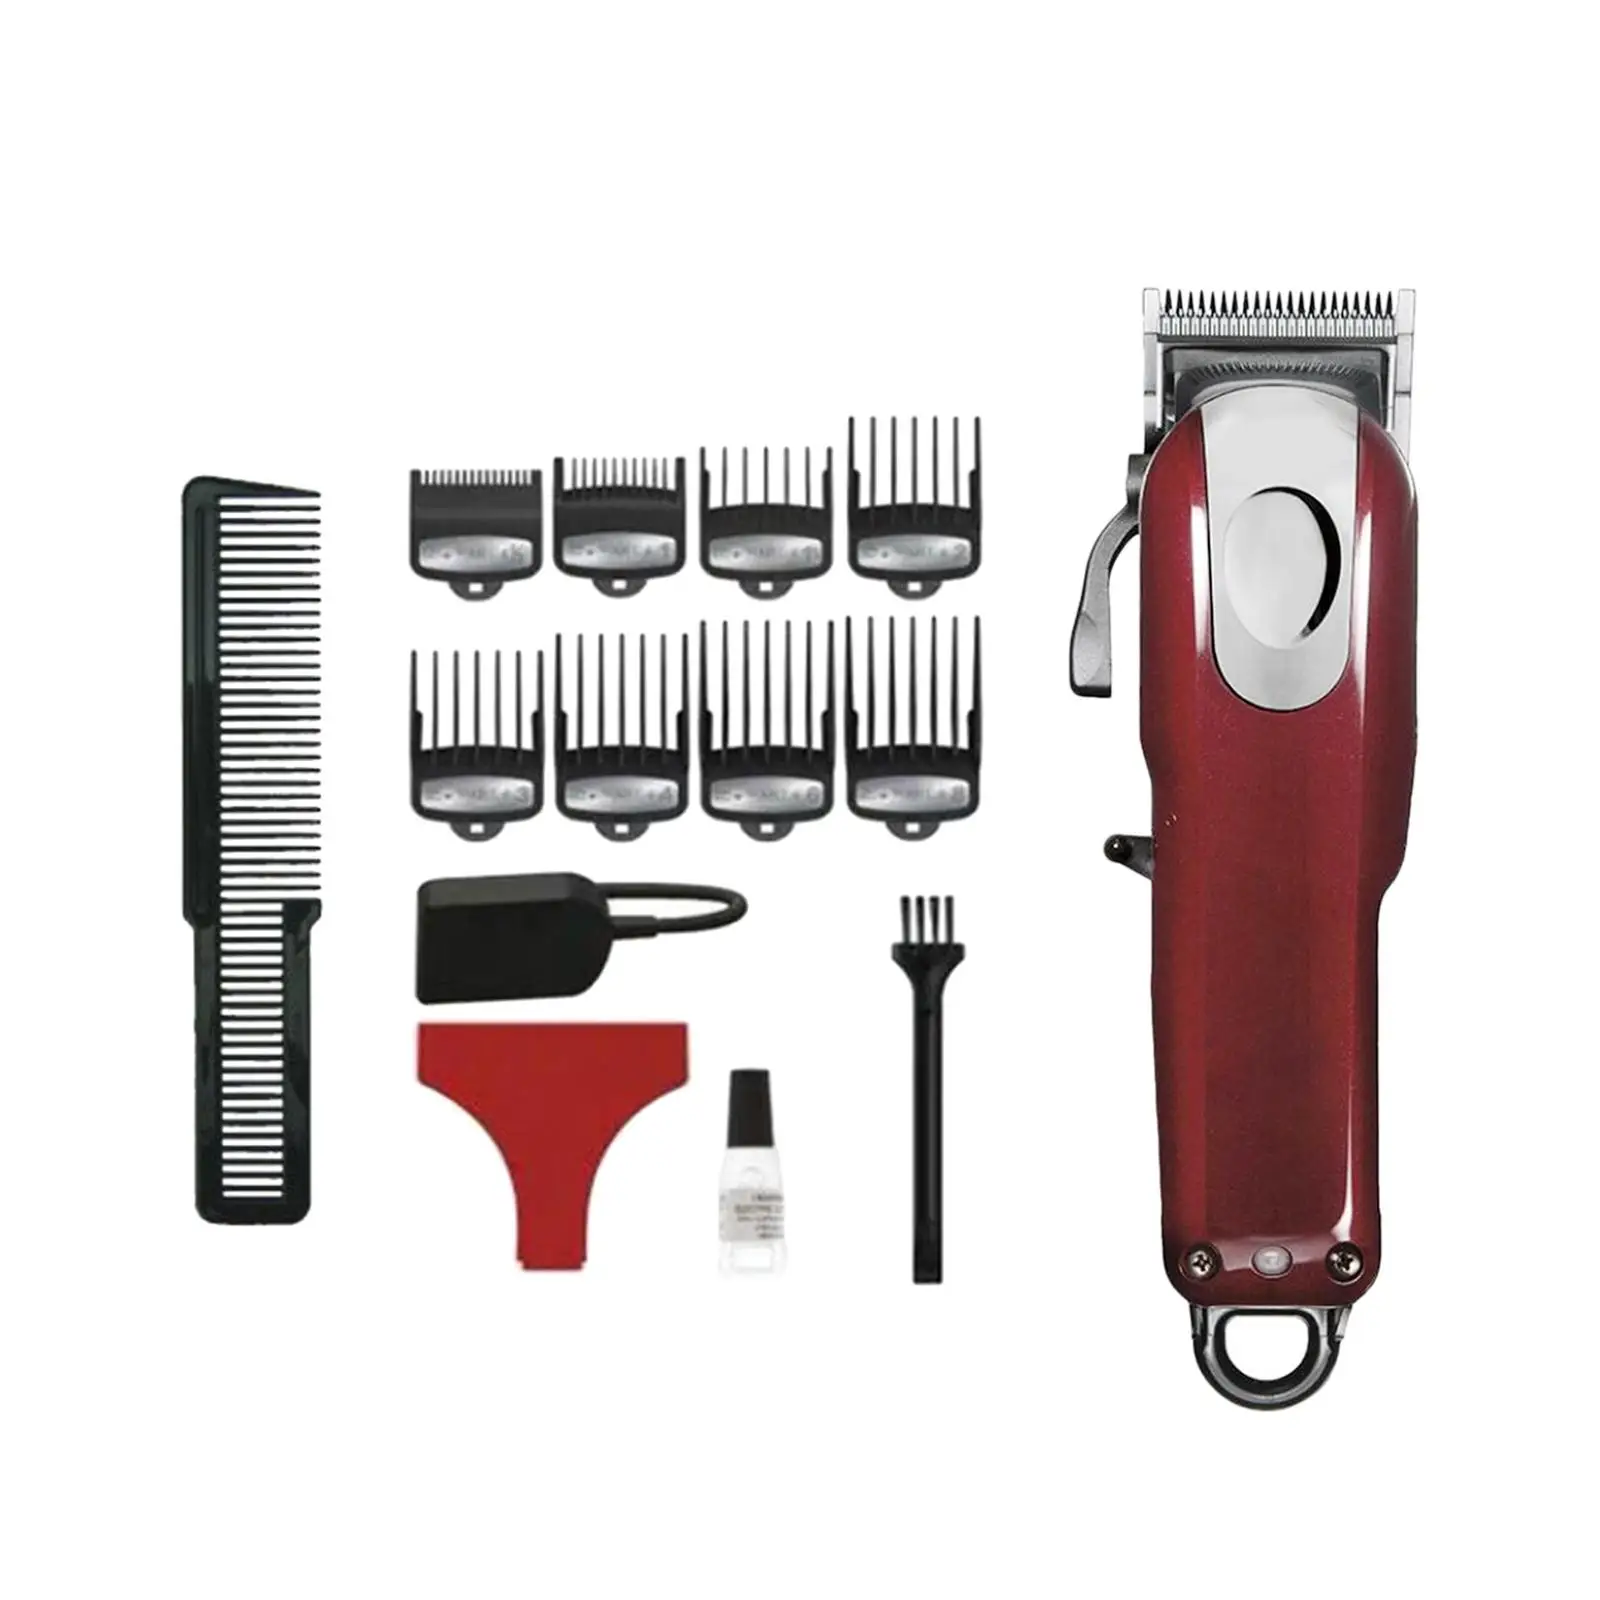 Hair Clipper Kit 8148 Machine UK Power Adapter for Personal Use Versatile with Styling Comb with Oil Bottle T Blade Sturdy